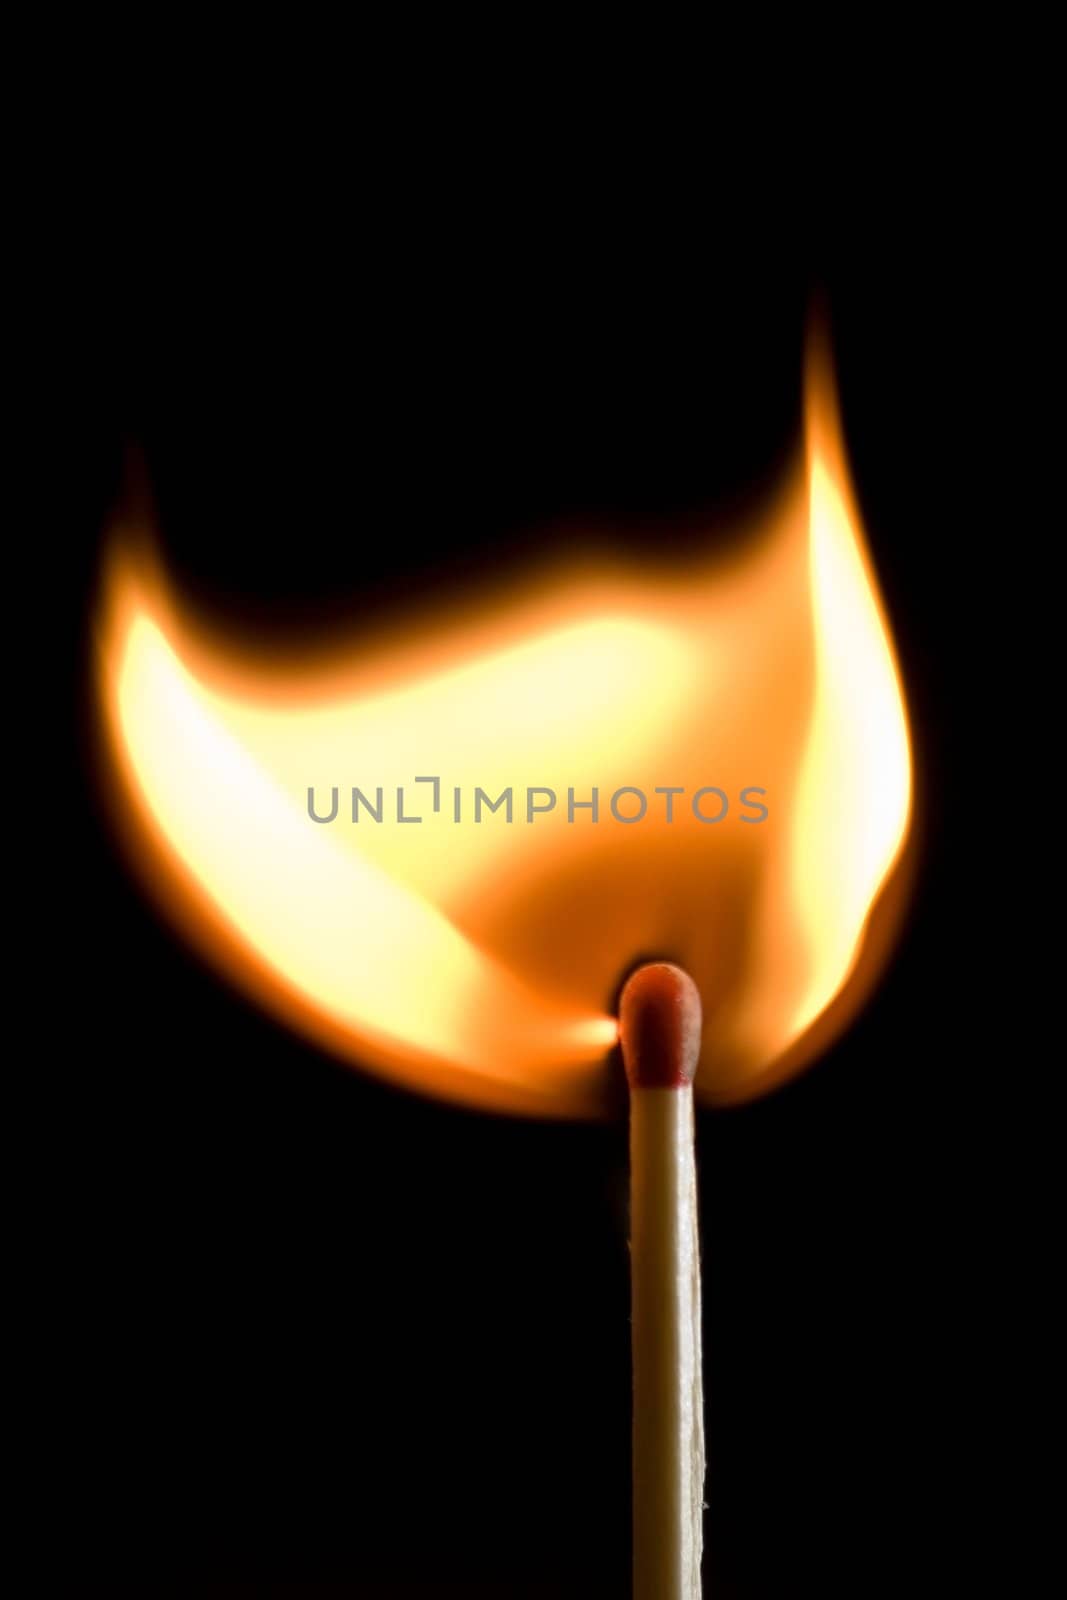 single match on fire isolated on black background